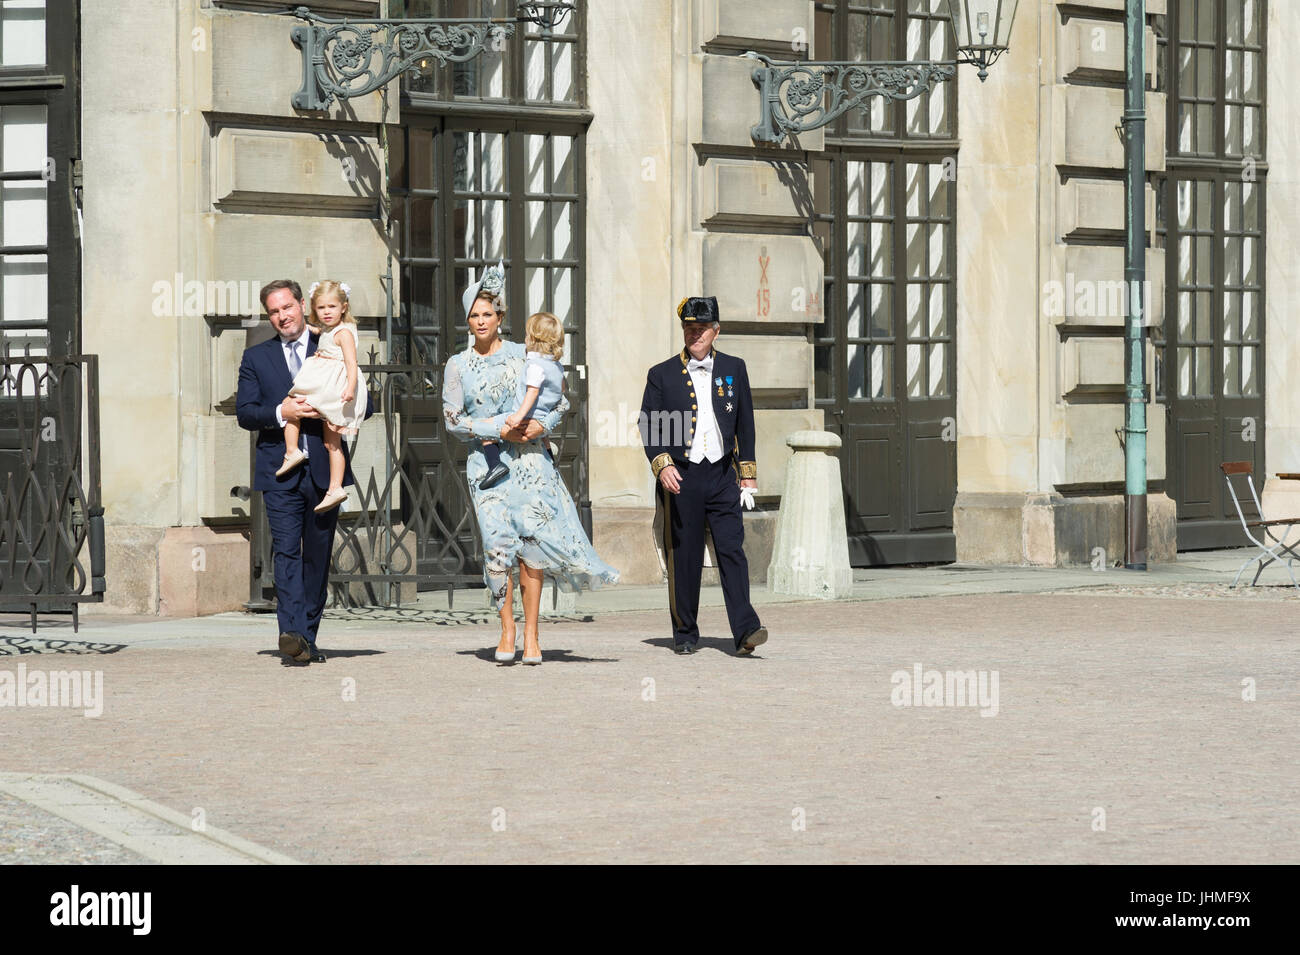 Inner Courtyard, The Royal Palace, Stockholm, Sweden, July 14, 2017. Crown Princess Victoria of Sweden’s 40th birthday will be celebrated over a two-day period in Stockholm and Öland. On Friday, 14 July, the celebration starts in Stockholm. The entire Swedish Royal Family is expected to be at the celebrations on both days. Mr Christopher O'Neill, Princess Leonore, Princess Madeleine, Prince Nicolas. Credit: Barbro Bergfeldt/Alamy Live News Stock Photo